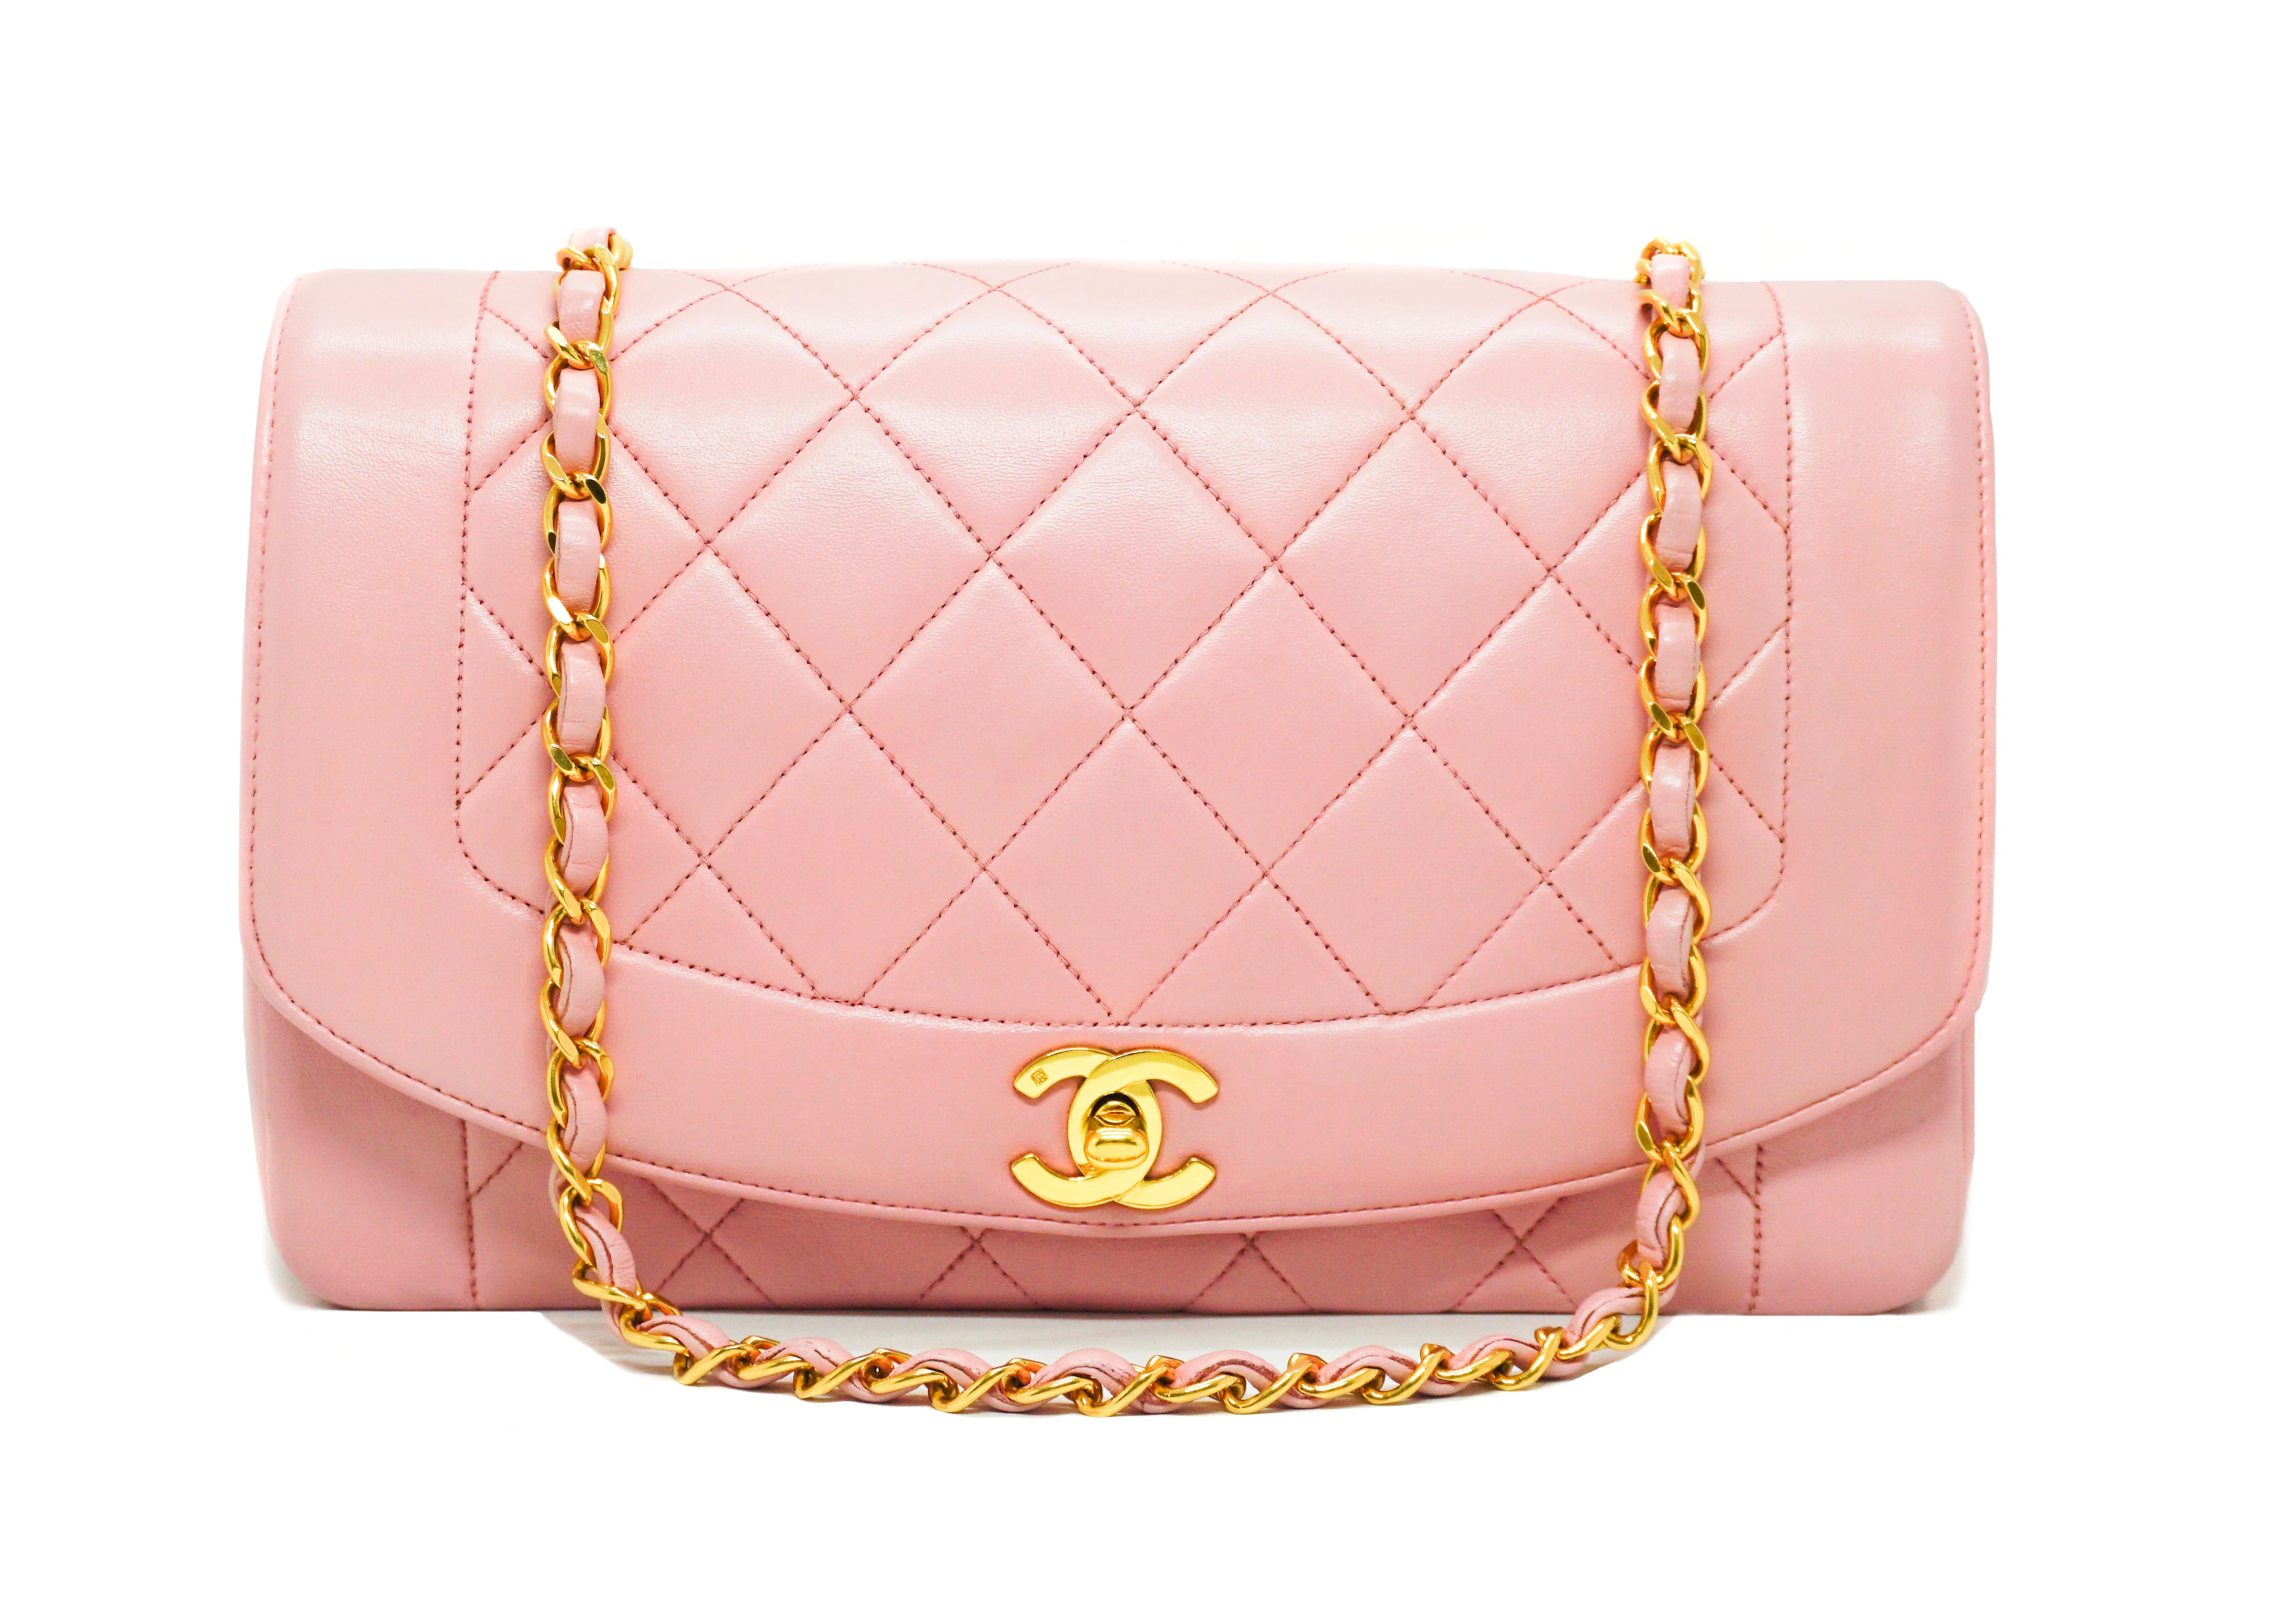 Chanel Vintage Pink Lambskin Diana Flap Bag – Classic Coco Vintage Luxury